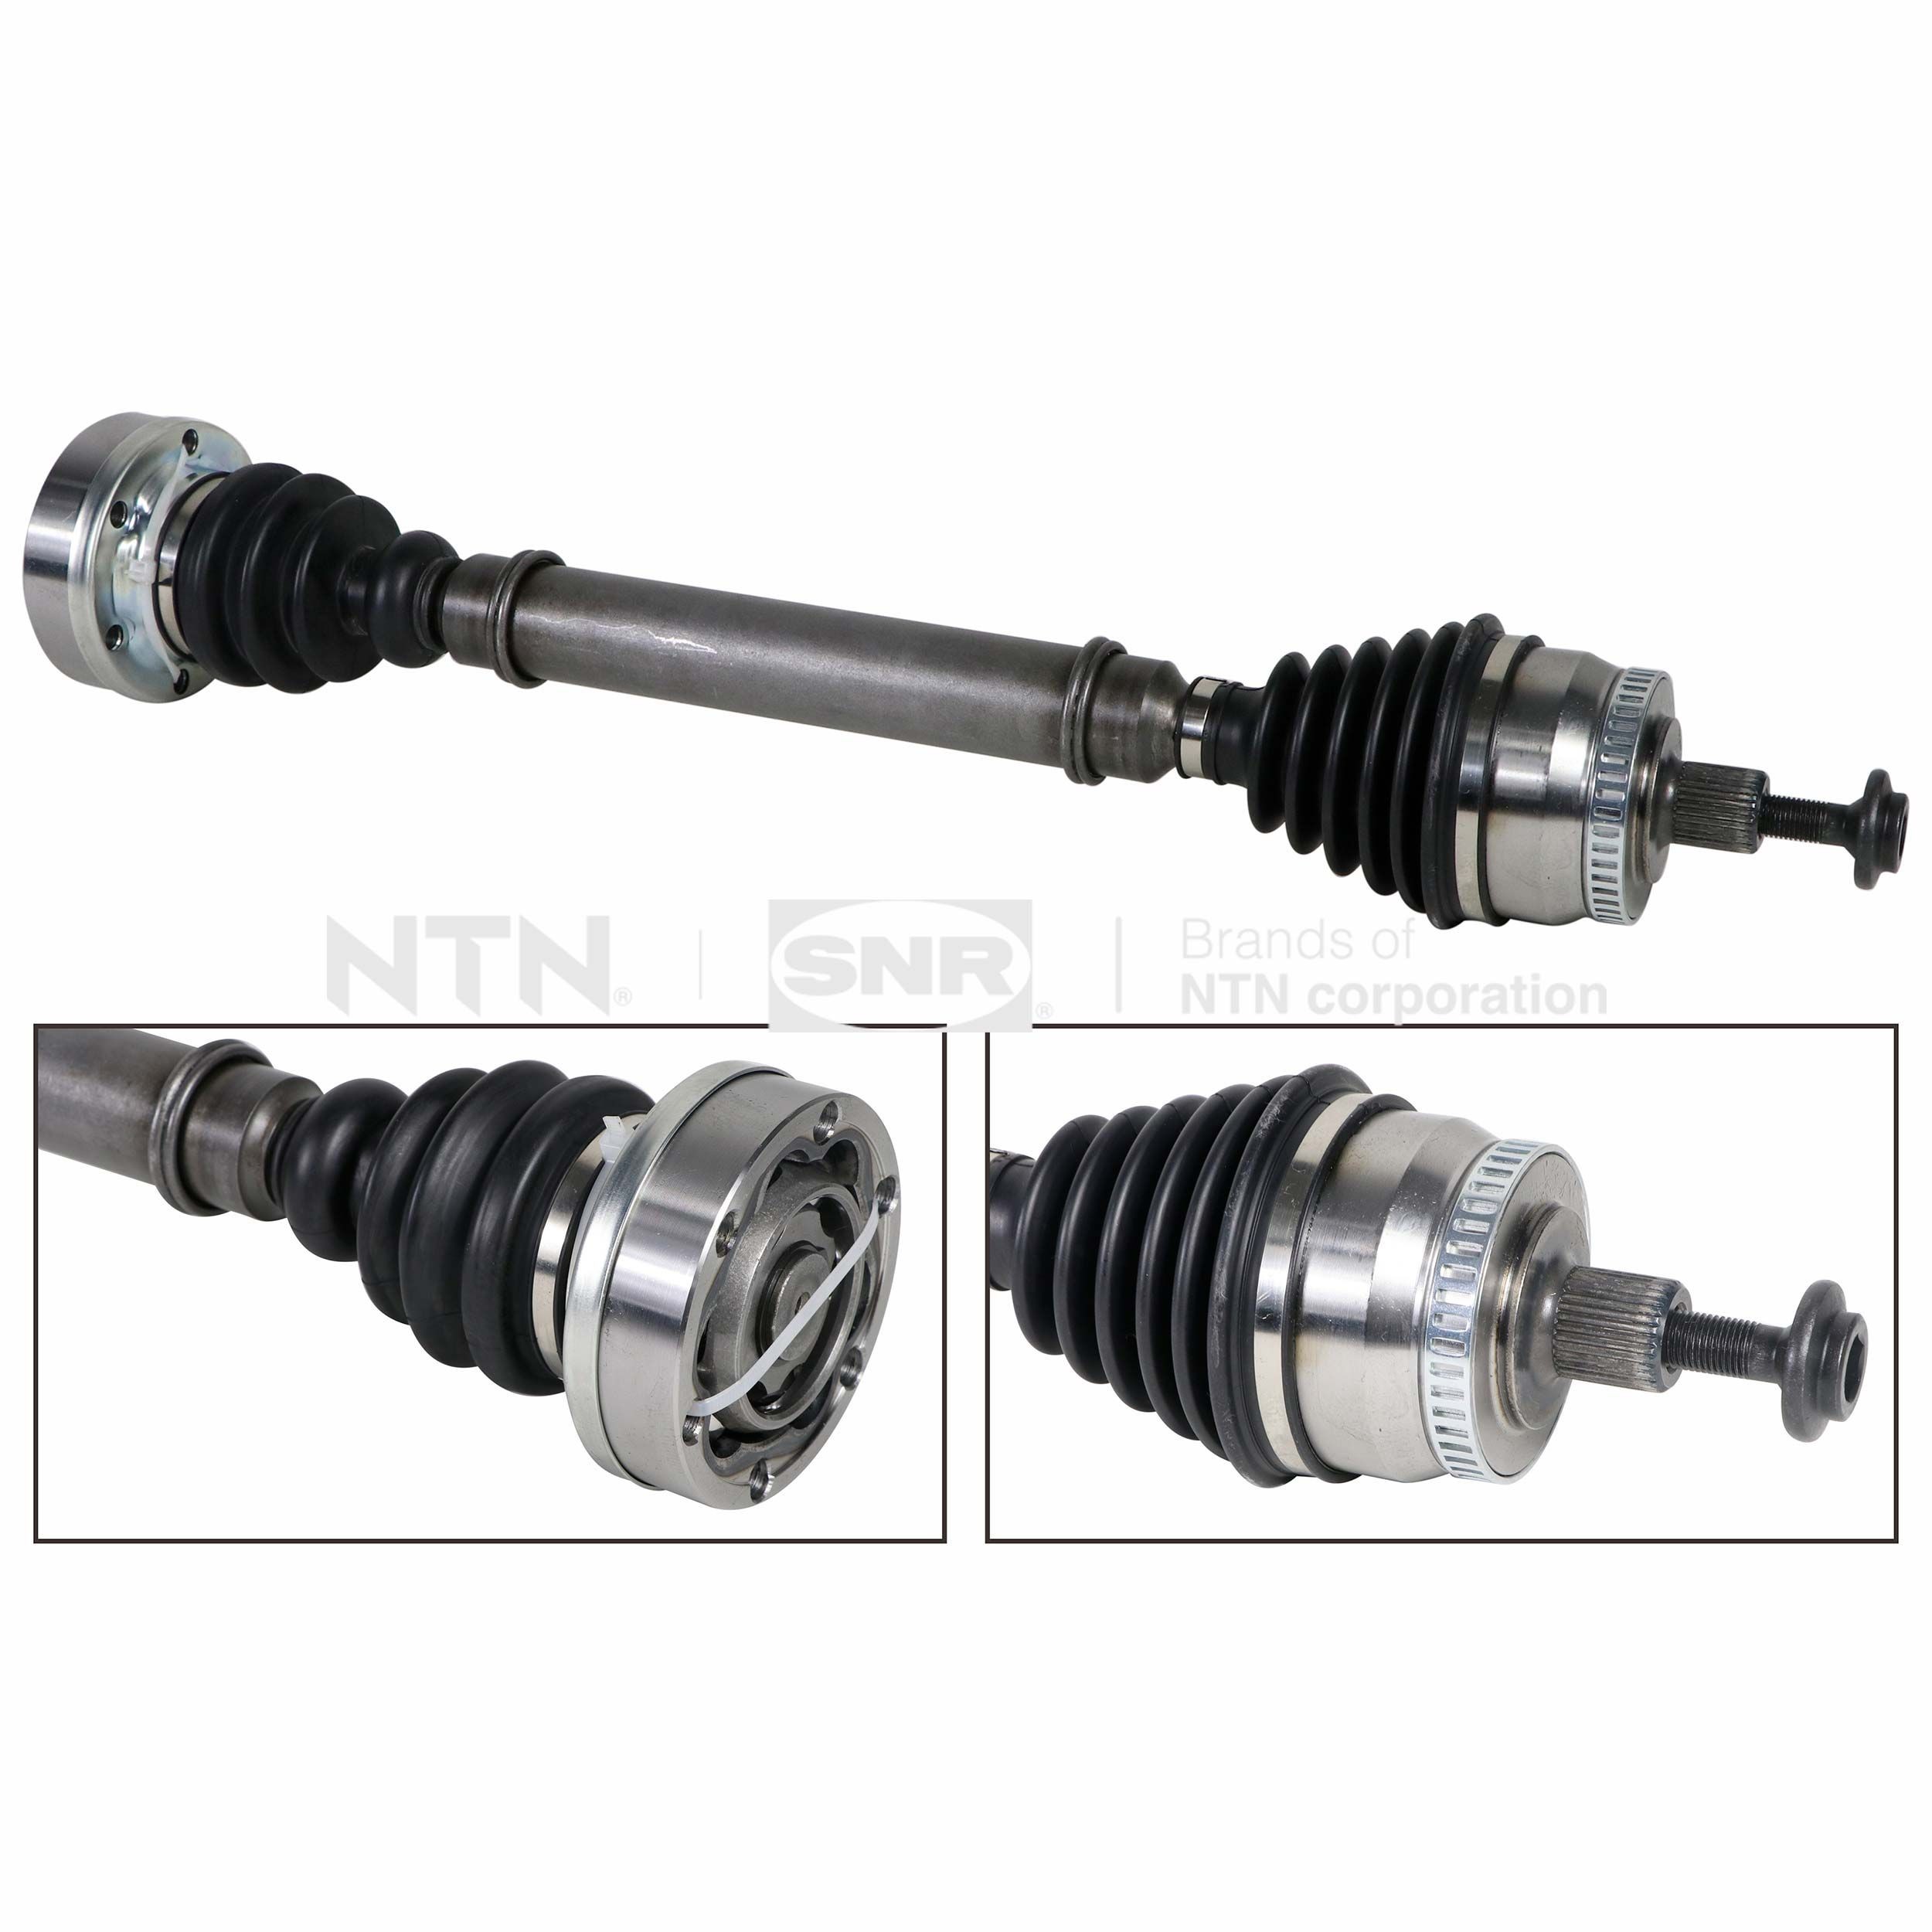 Great value for money - SNR Drive shaft DK54.061